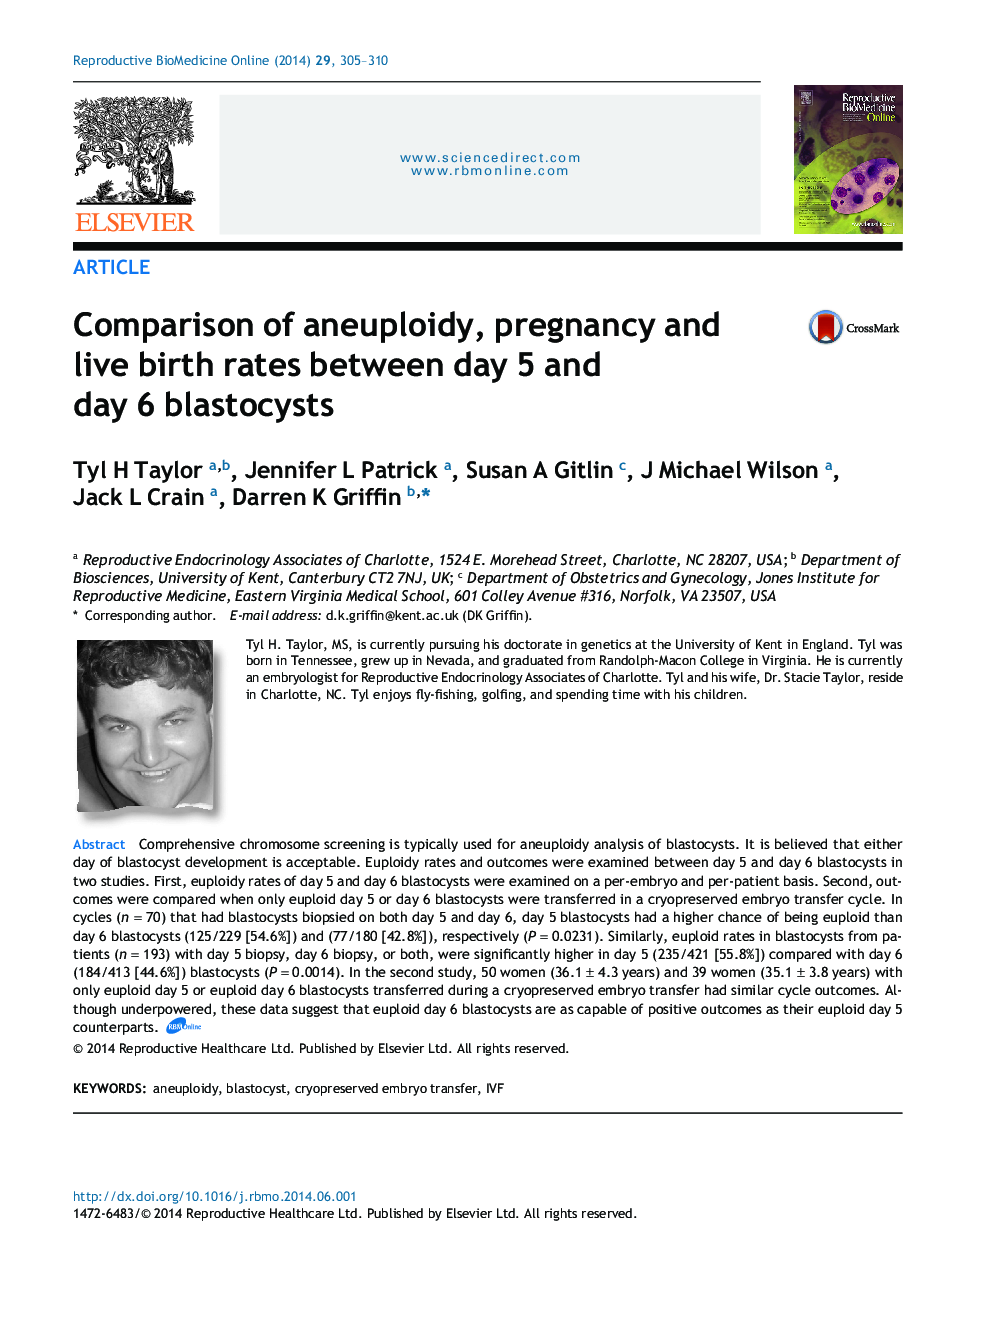 Comparison of aneuploidy, pregnancy and live birth rates between day 5 and day 6 blastocysts